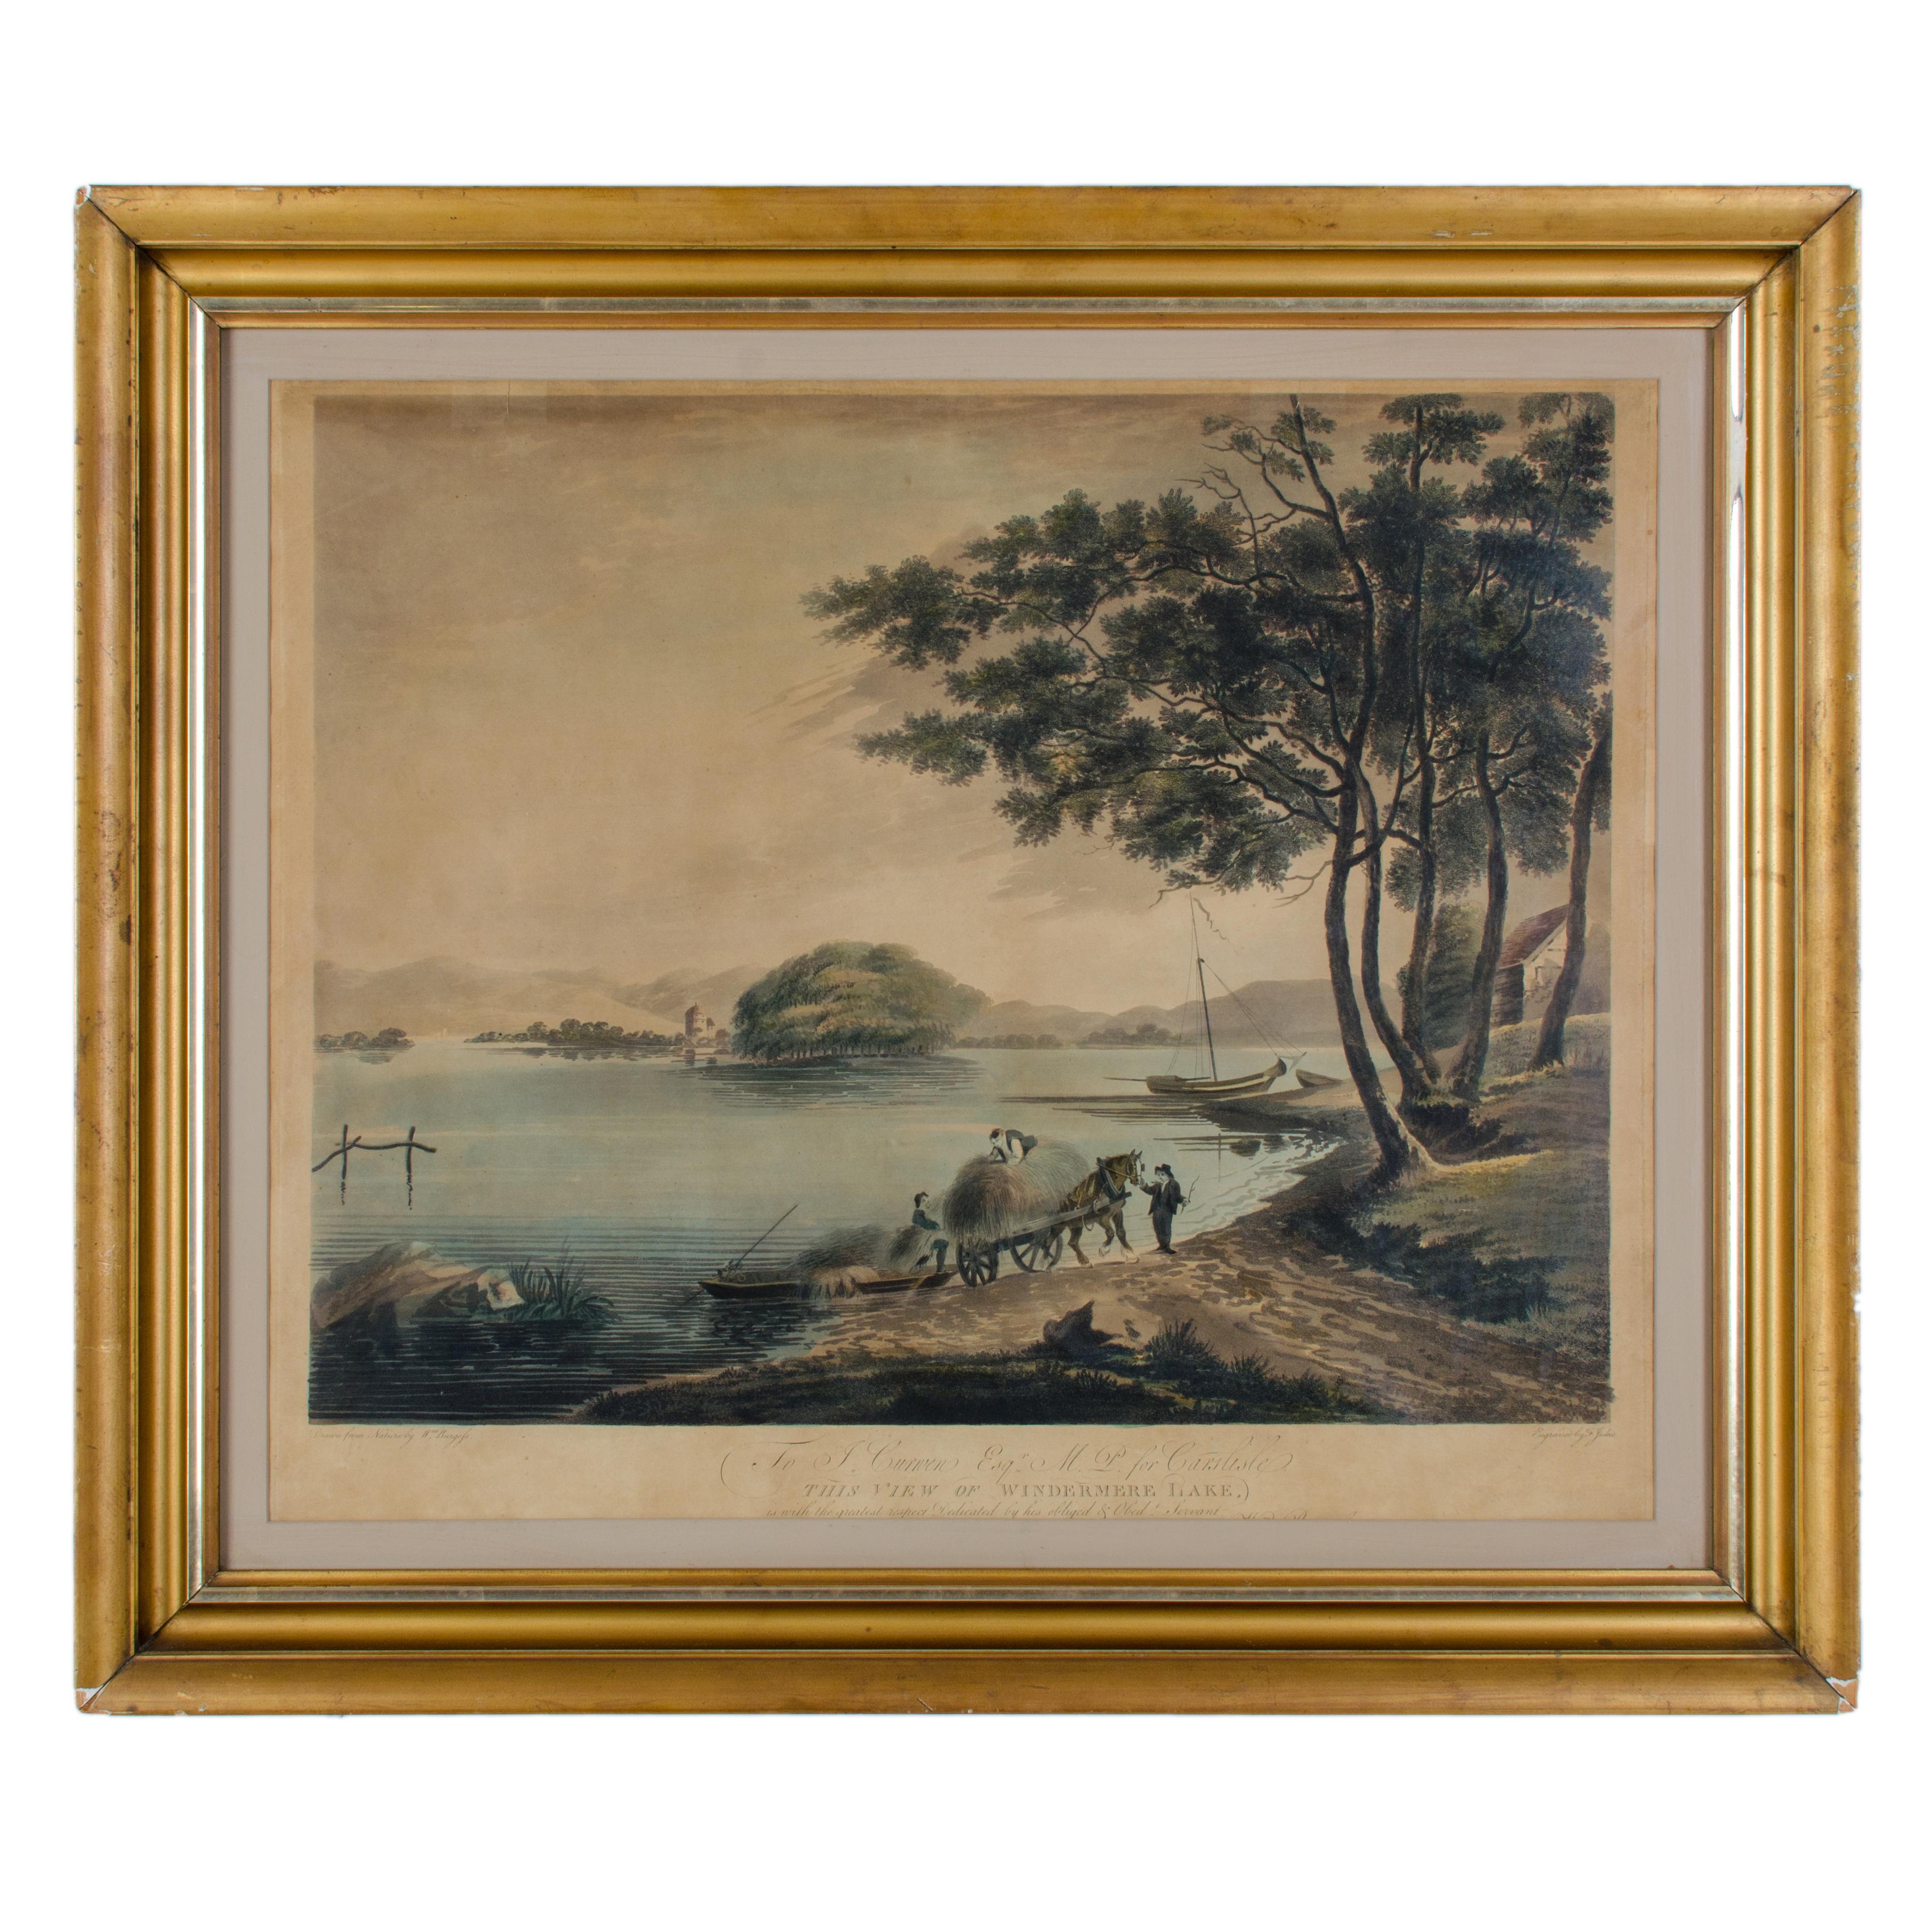 A pair of framed hand-colored aquatint engravings published by Francis Jukes after William Burgess in 1796.  The engravings depict scenes from Lake Windermere in Cumbria, England.  

A View of Lake Windermere, taken from Bowness Ferry “to James